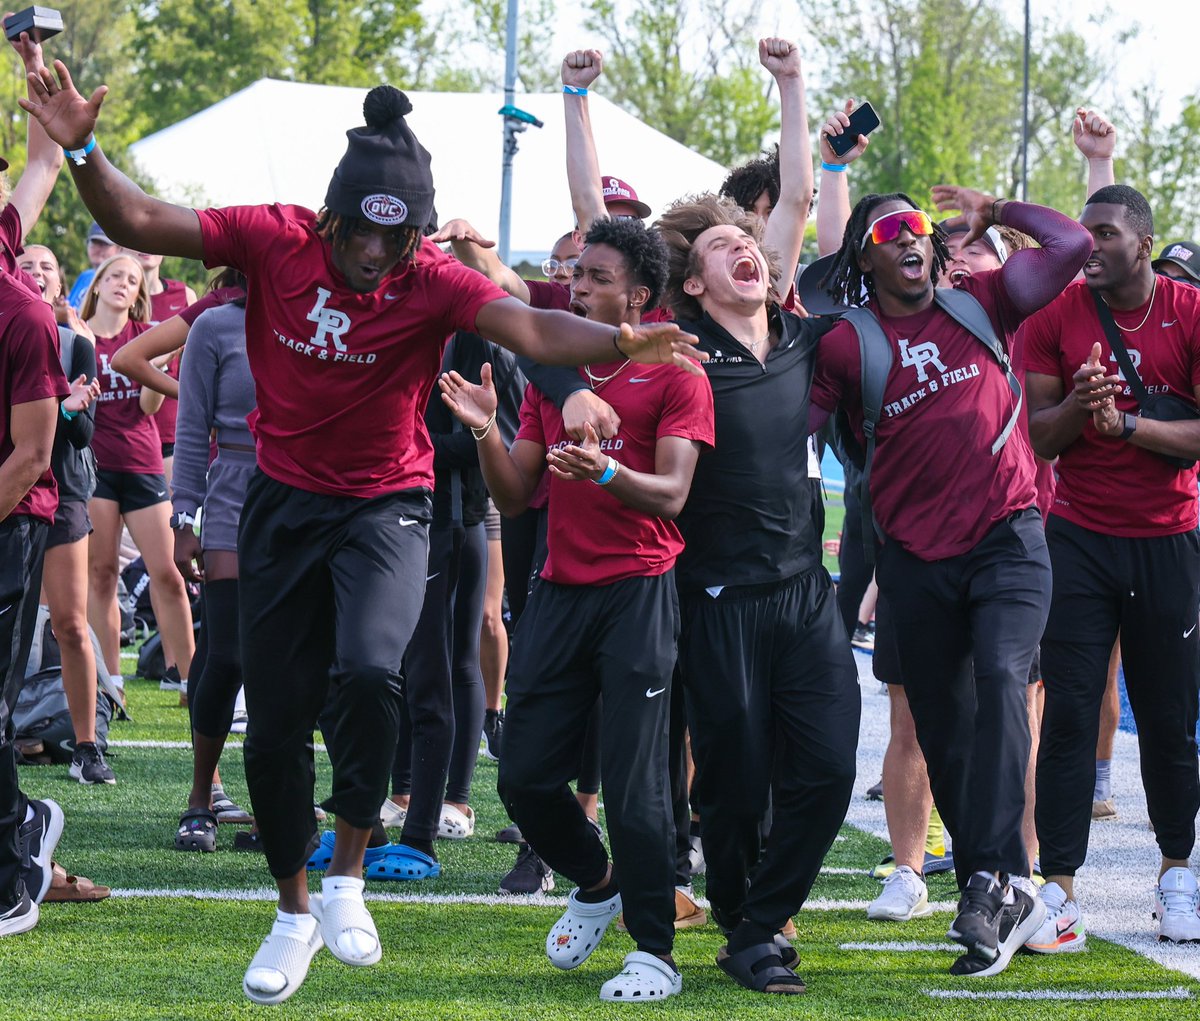 Sunday Student Spotlight 

Alumni Edition 

Congratulations to John Sanderson (Class of 2023) and the Little Rock Trojans men's Track and Field team on winning the program's first-ever outdoor Ohio Valley Conference Championship!
(Thread)